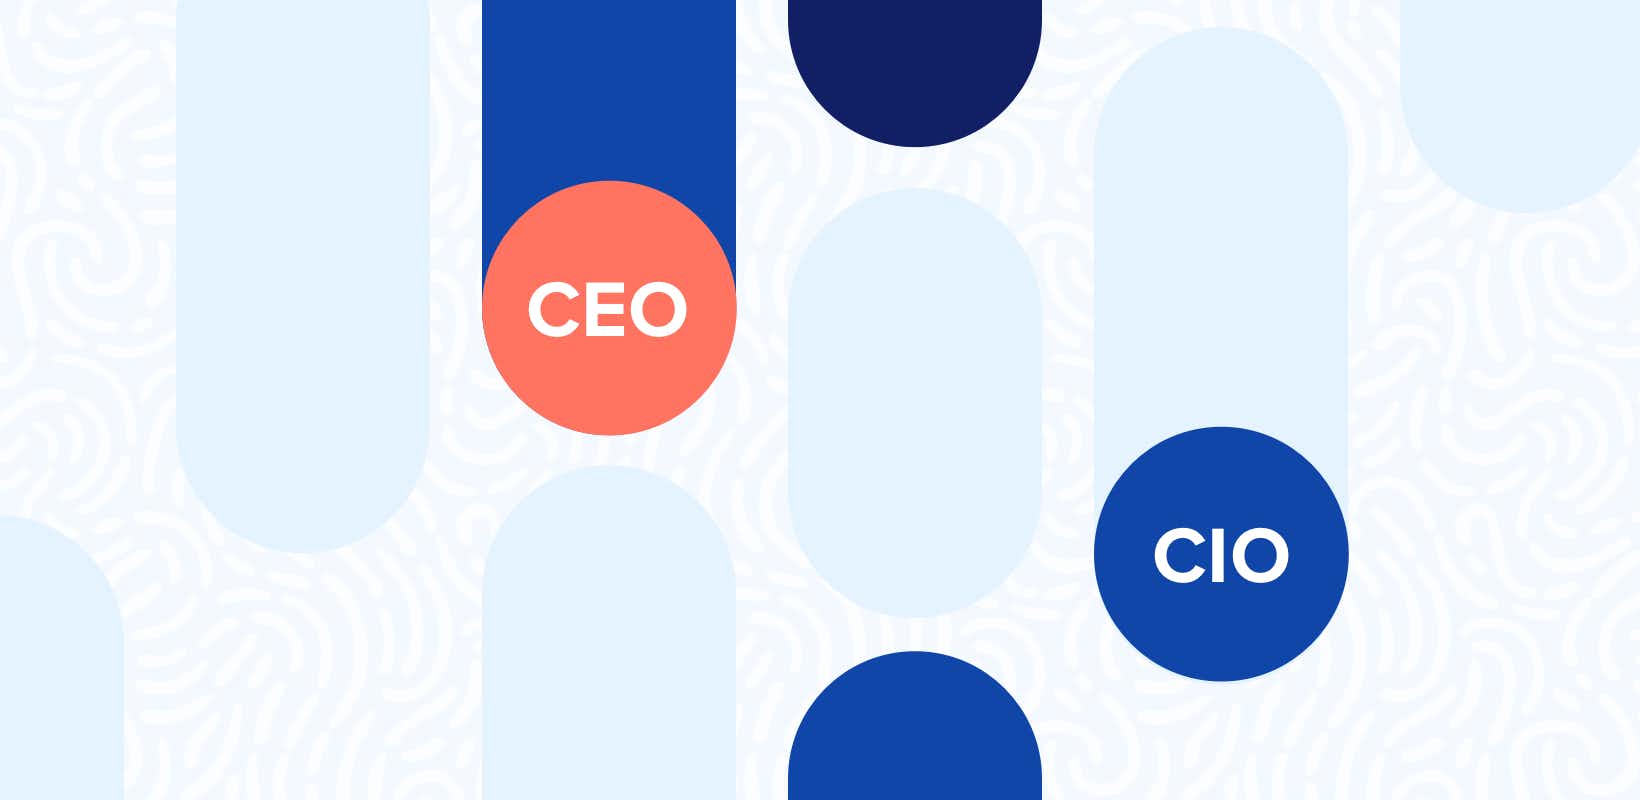 Why ‘Chief Information Officer’ Will Soon Be Renamed ‘Chief Experience Officer’